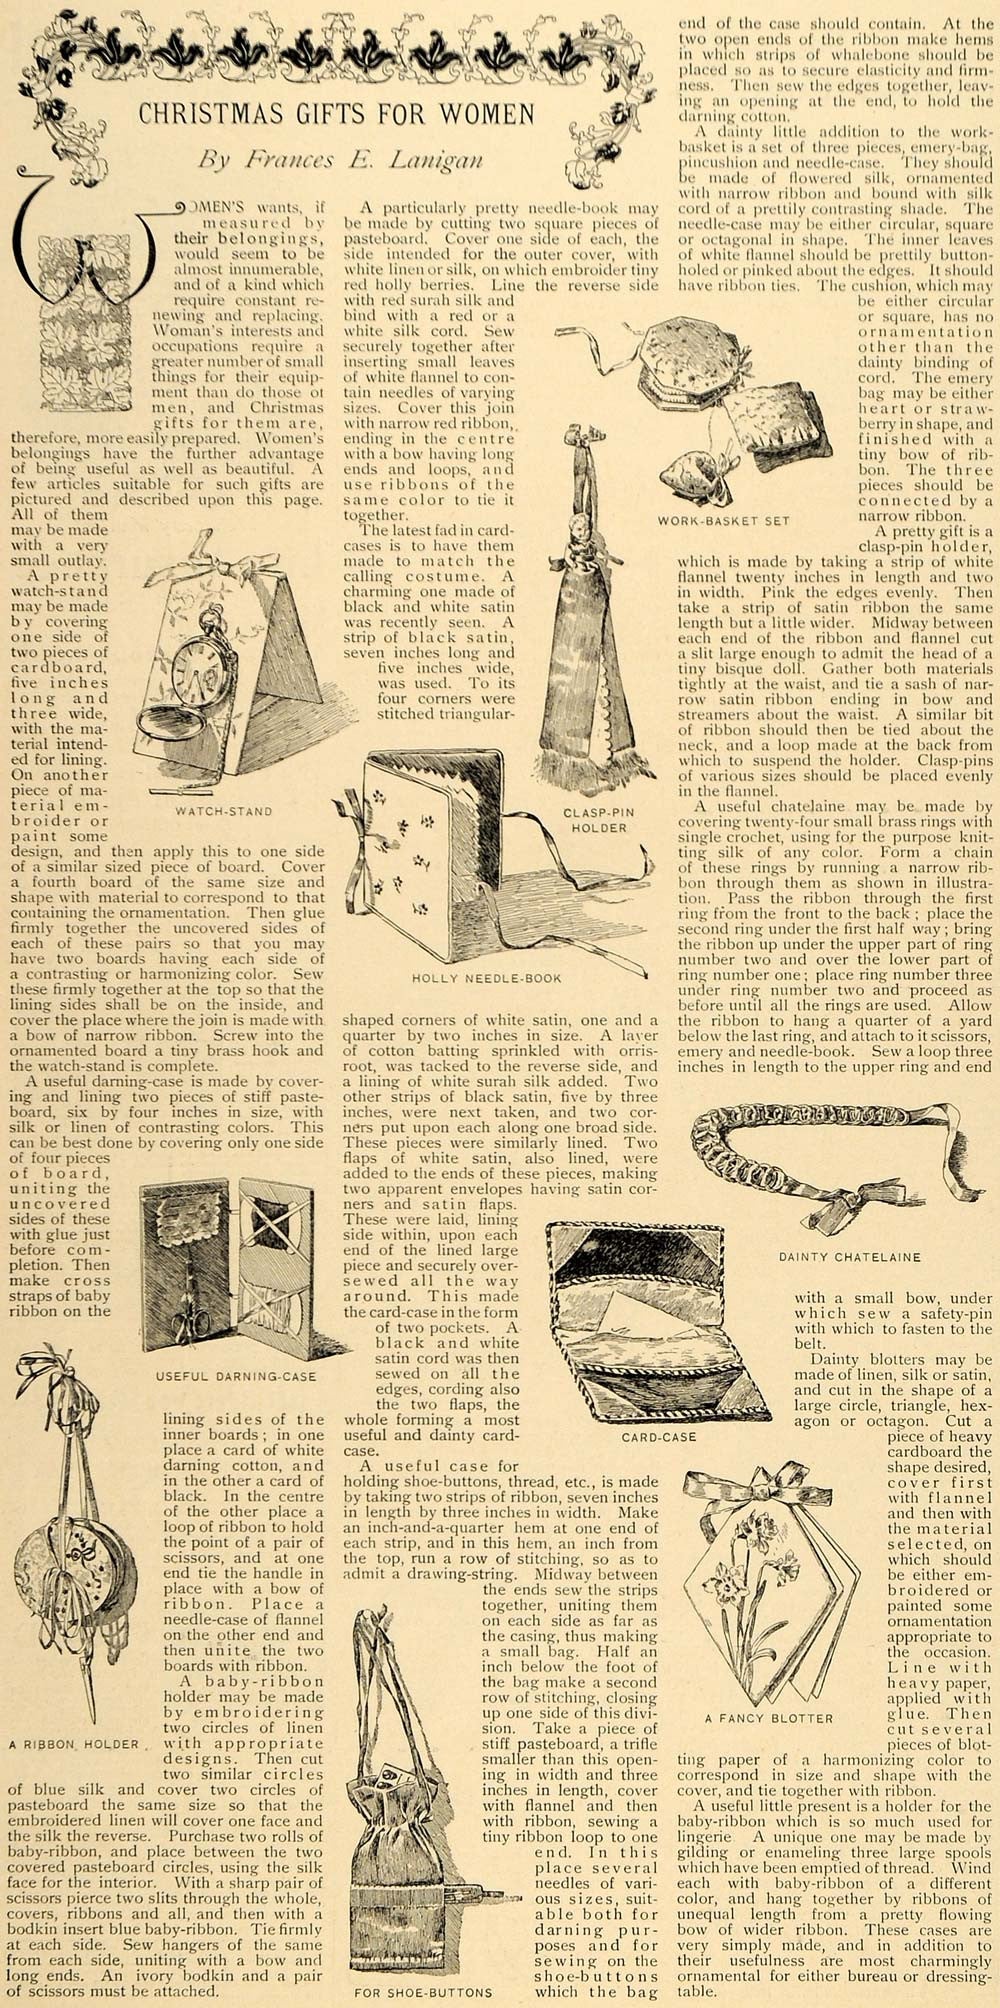 1896 Article Christmas Gifts for Women Frances Lanigan Watch Holder Needle LHJ5 - Period Paper
